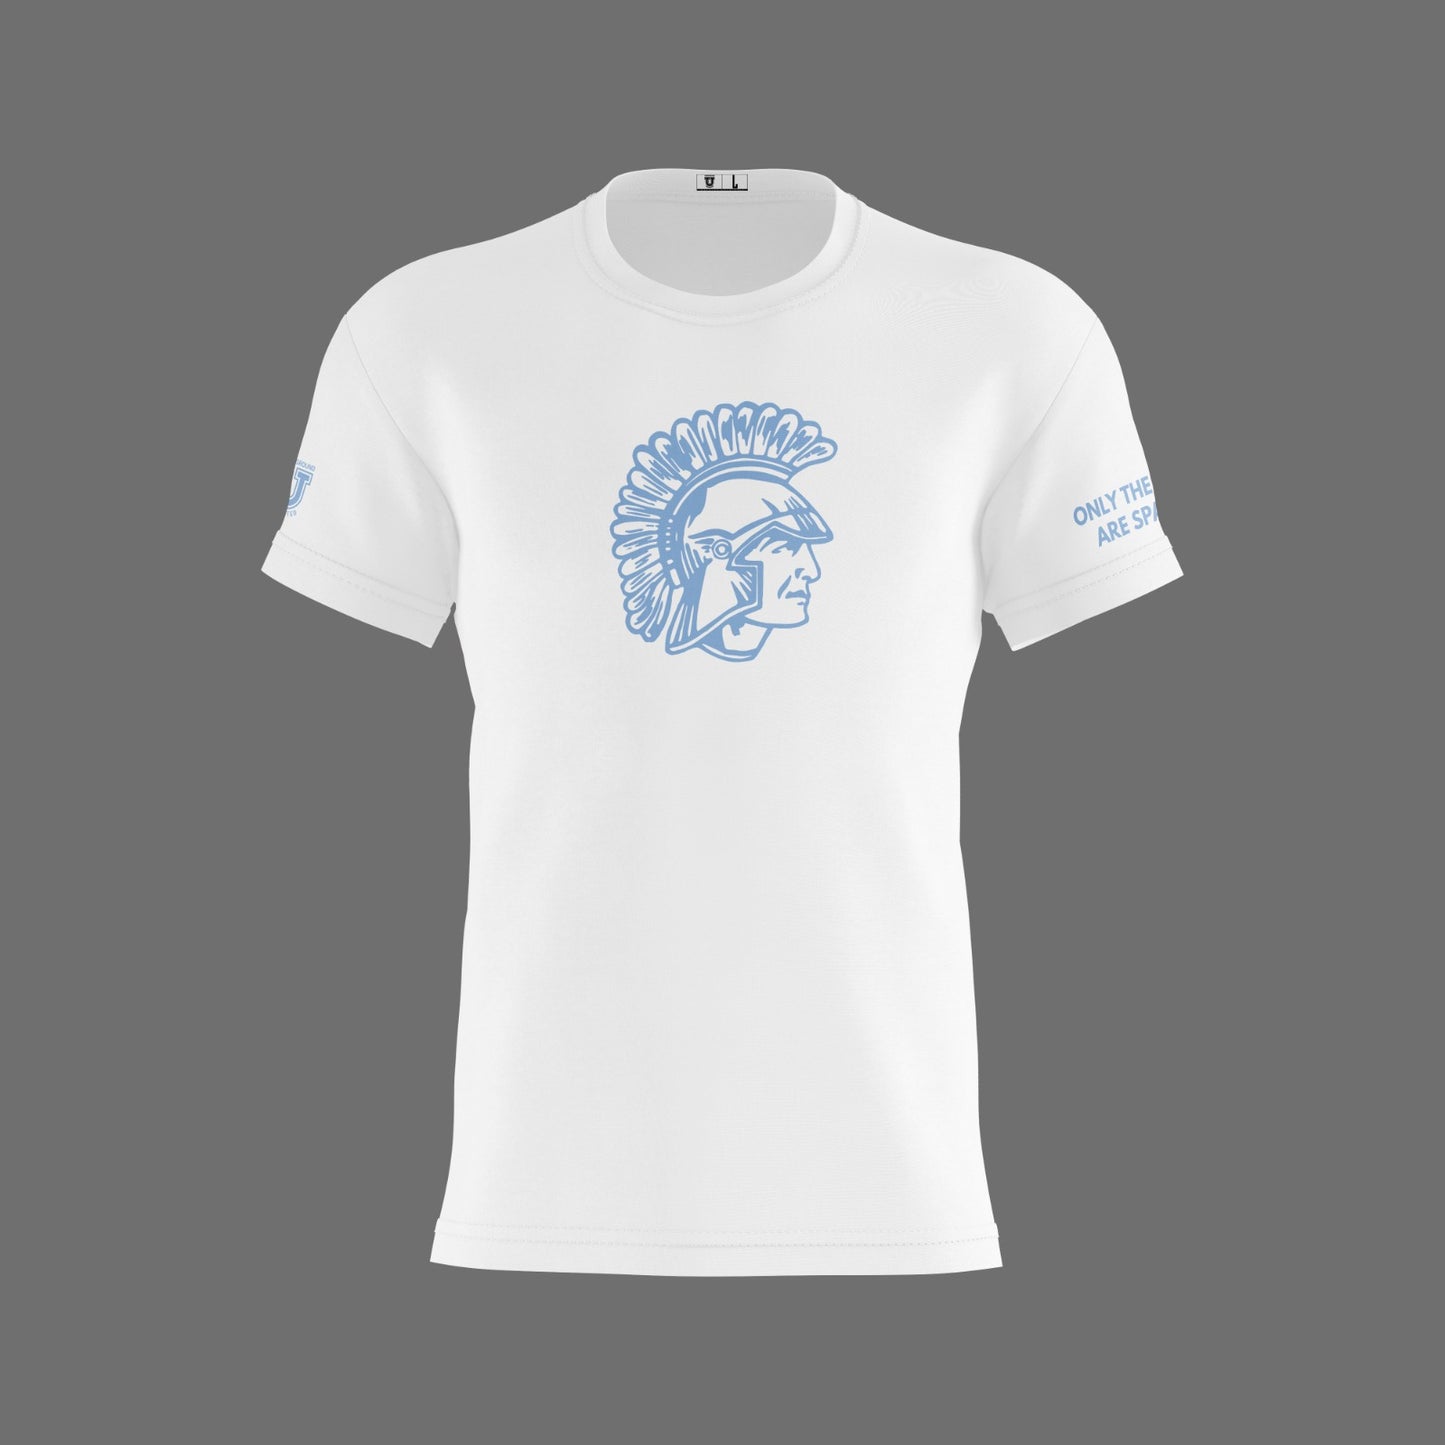 W.T. Chipman Dri Tech Shirt ~ Spartan White "Only the Strong are Spartans"